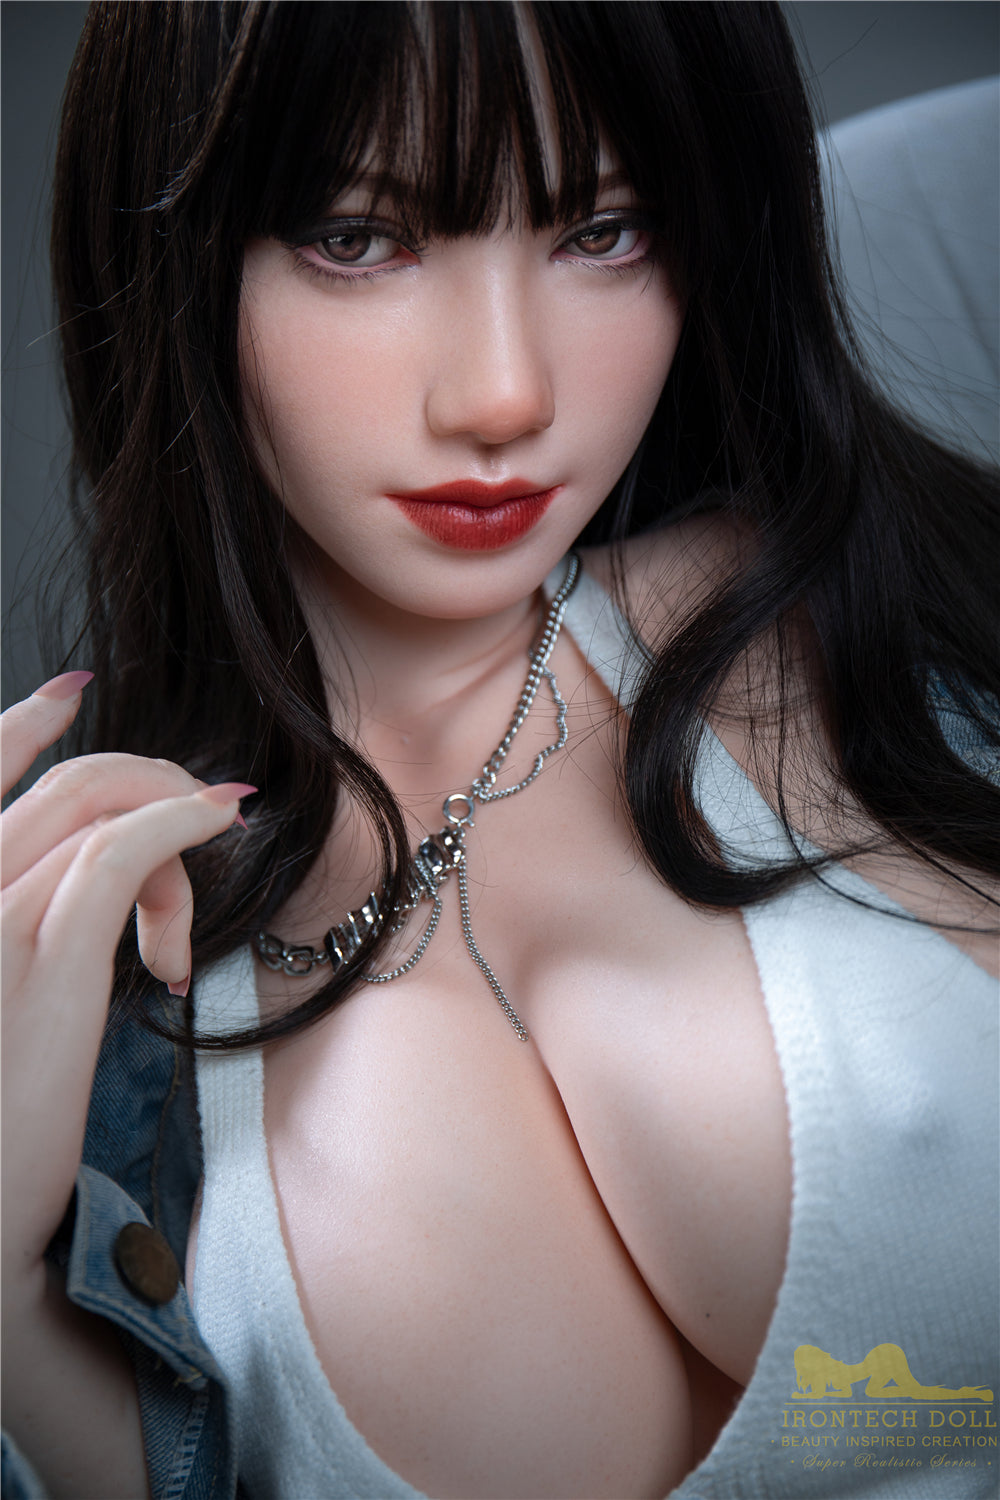 Irontech - Silicone Real Love Doll - 5ft 5in (165cm) - Amelia - Love Dolls 4U